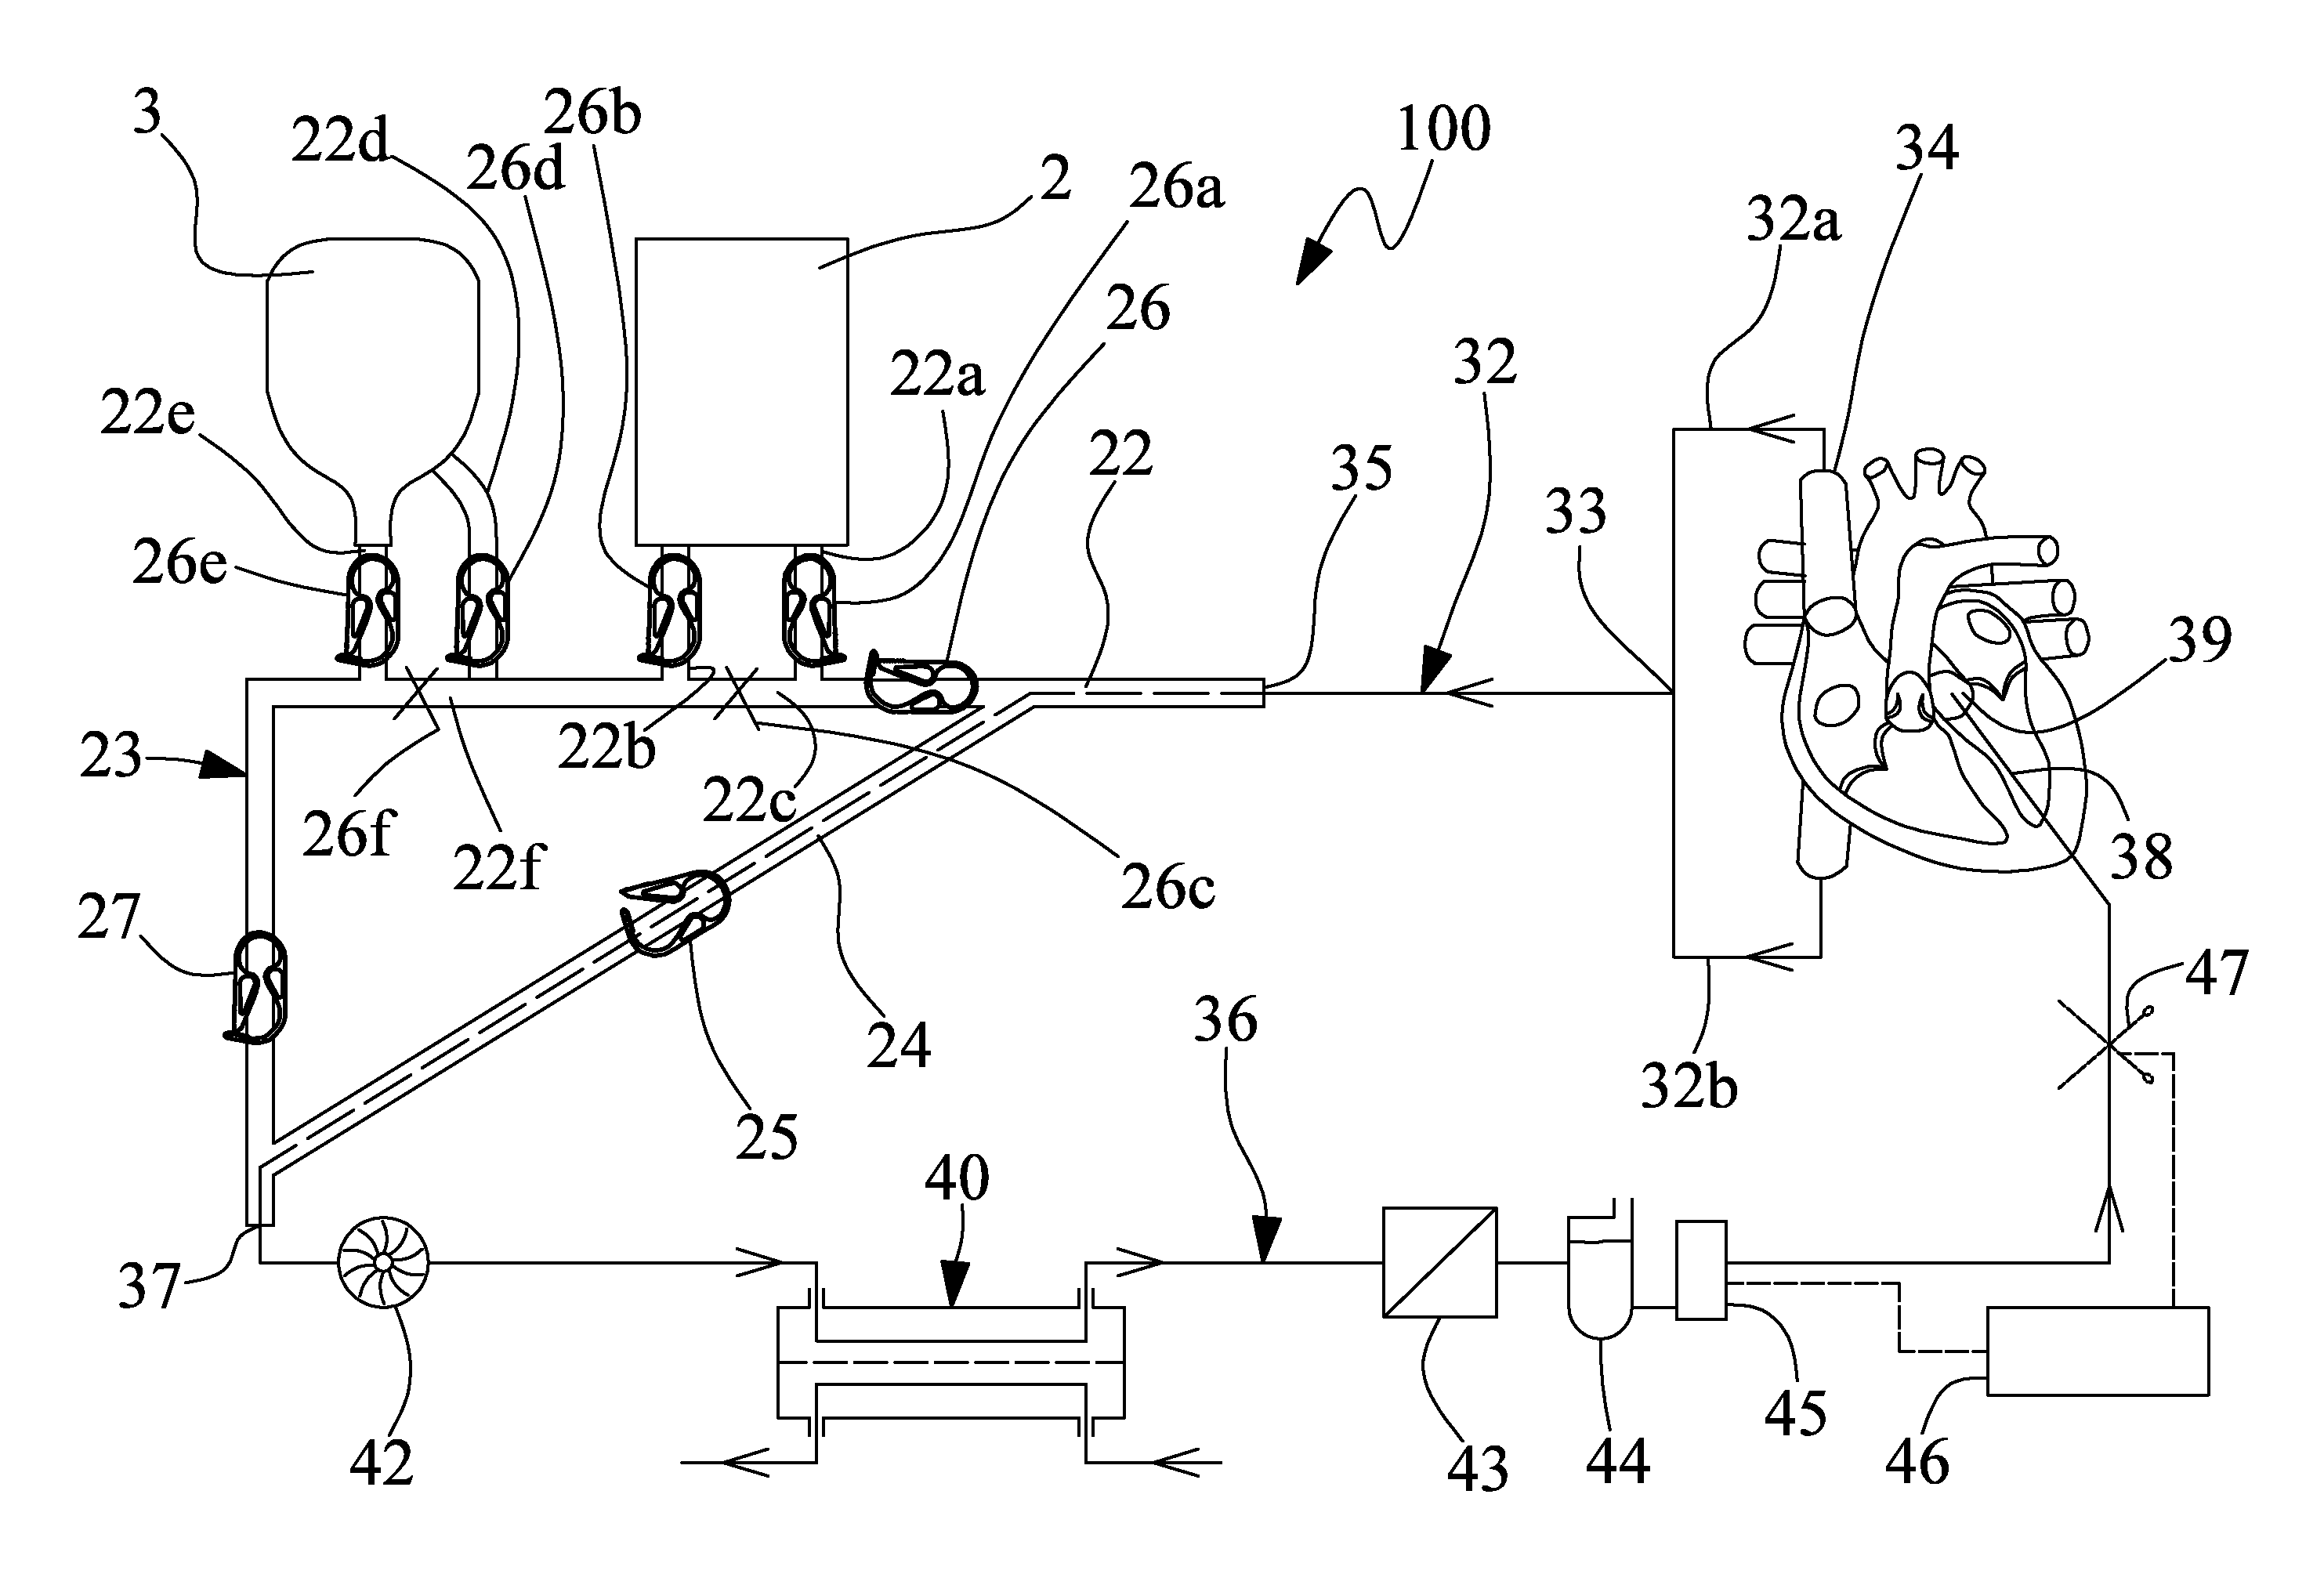 Device for medical use for collecting and transit of blood, blood derivatives and/or filler fluids, and an extracorporeal circuit comprising the device